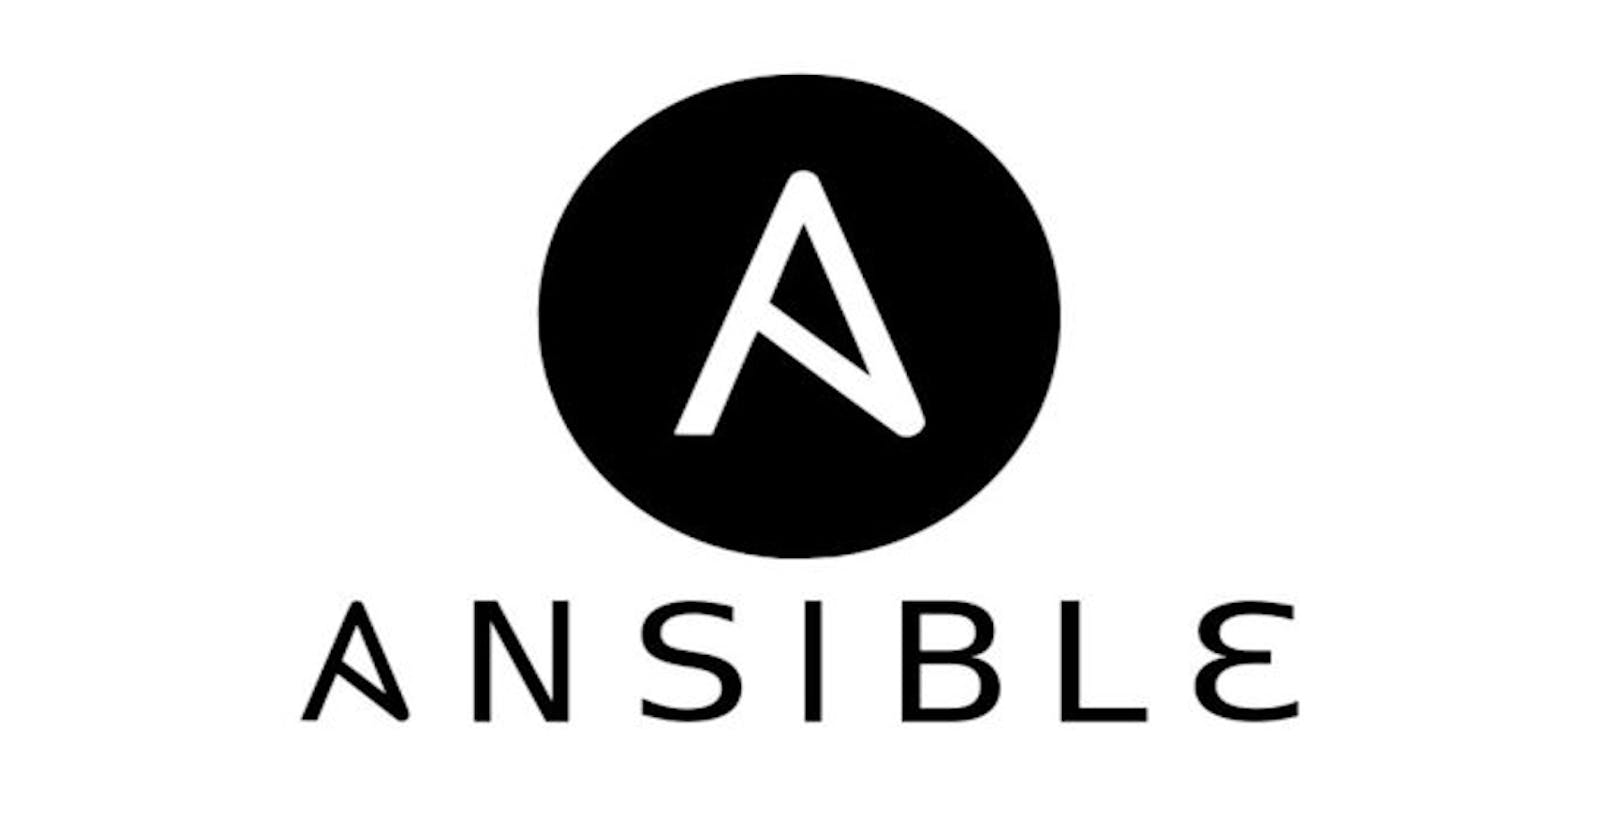 Everything about Ansible